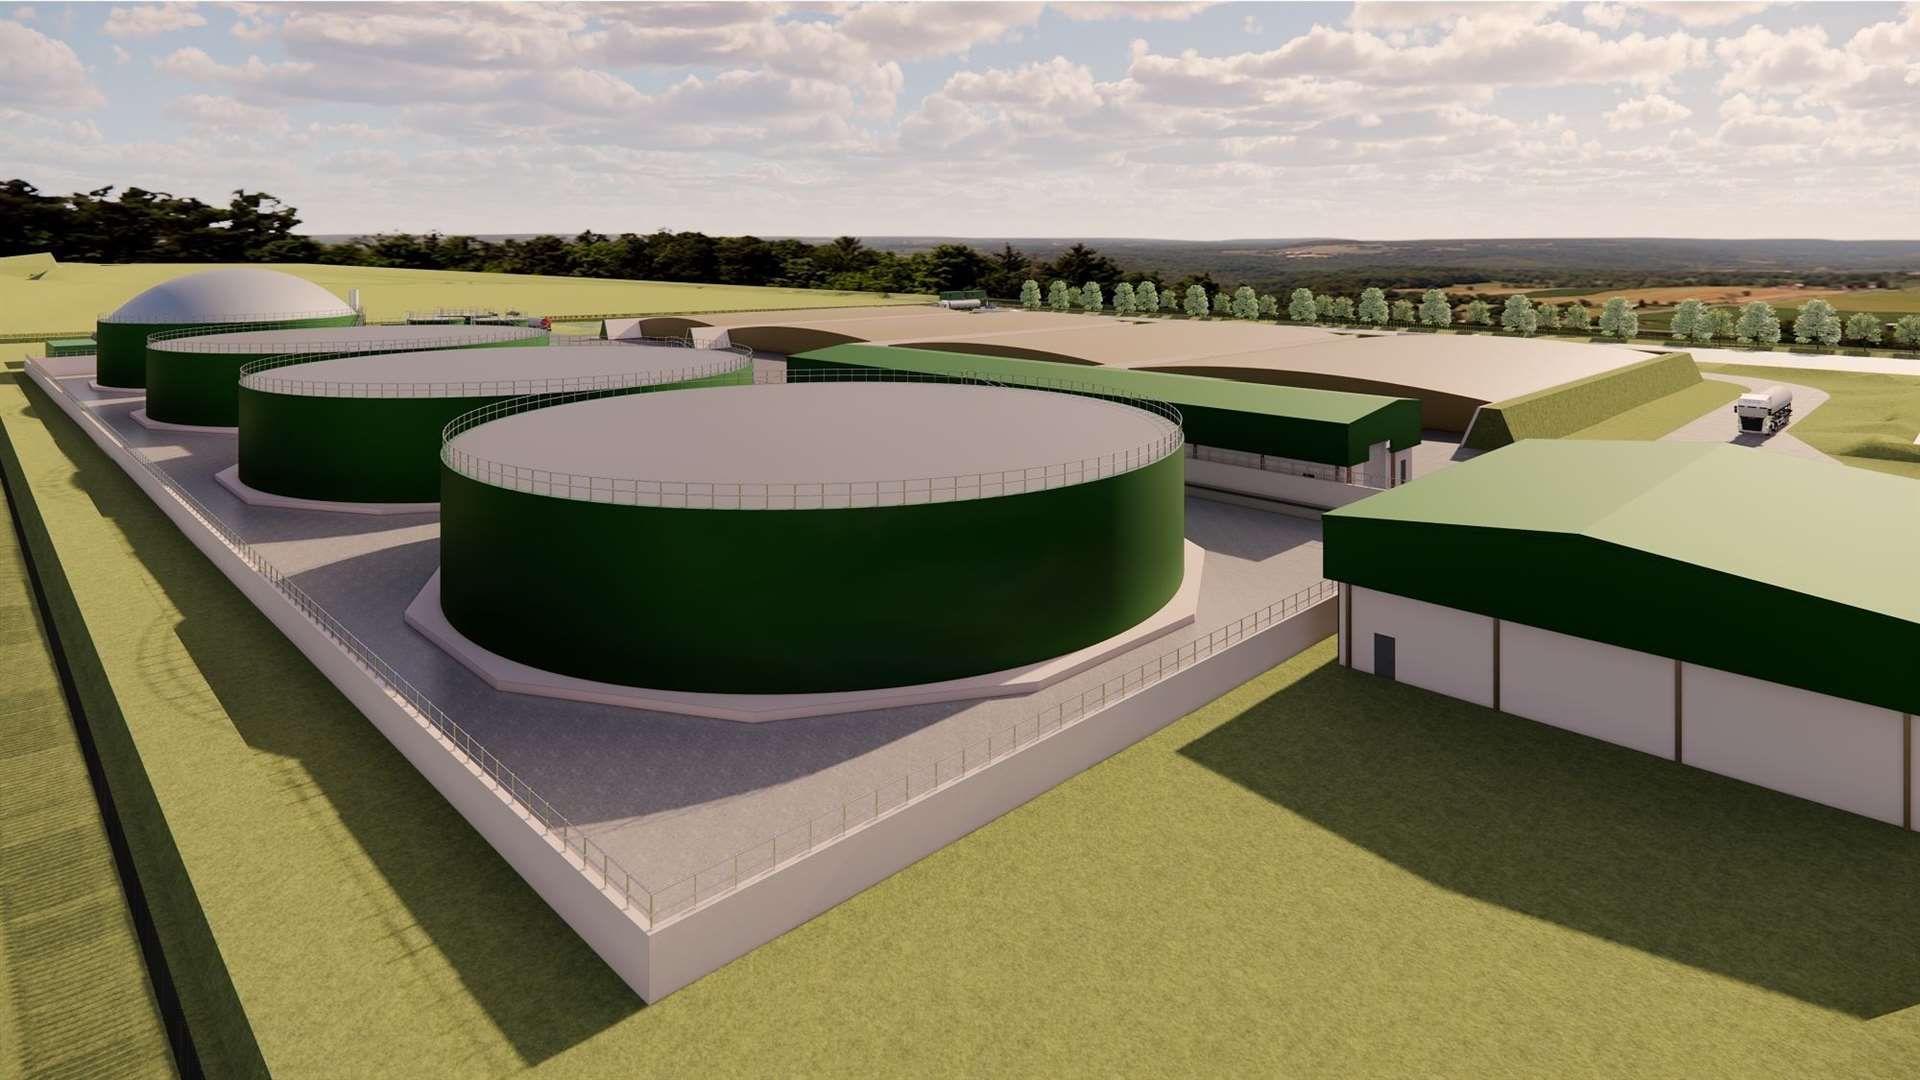 The new anaerobic digestion plant would be built at Fearn Airfield.